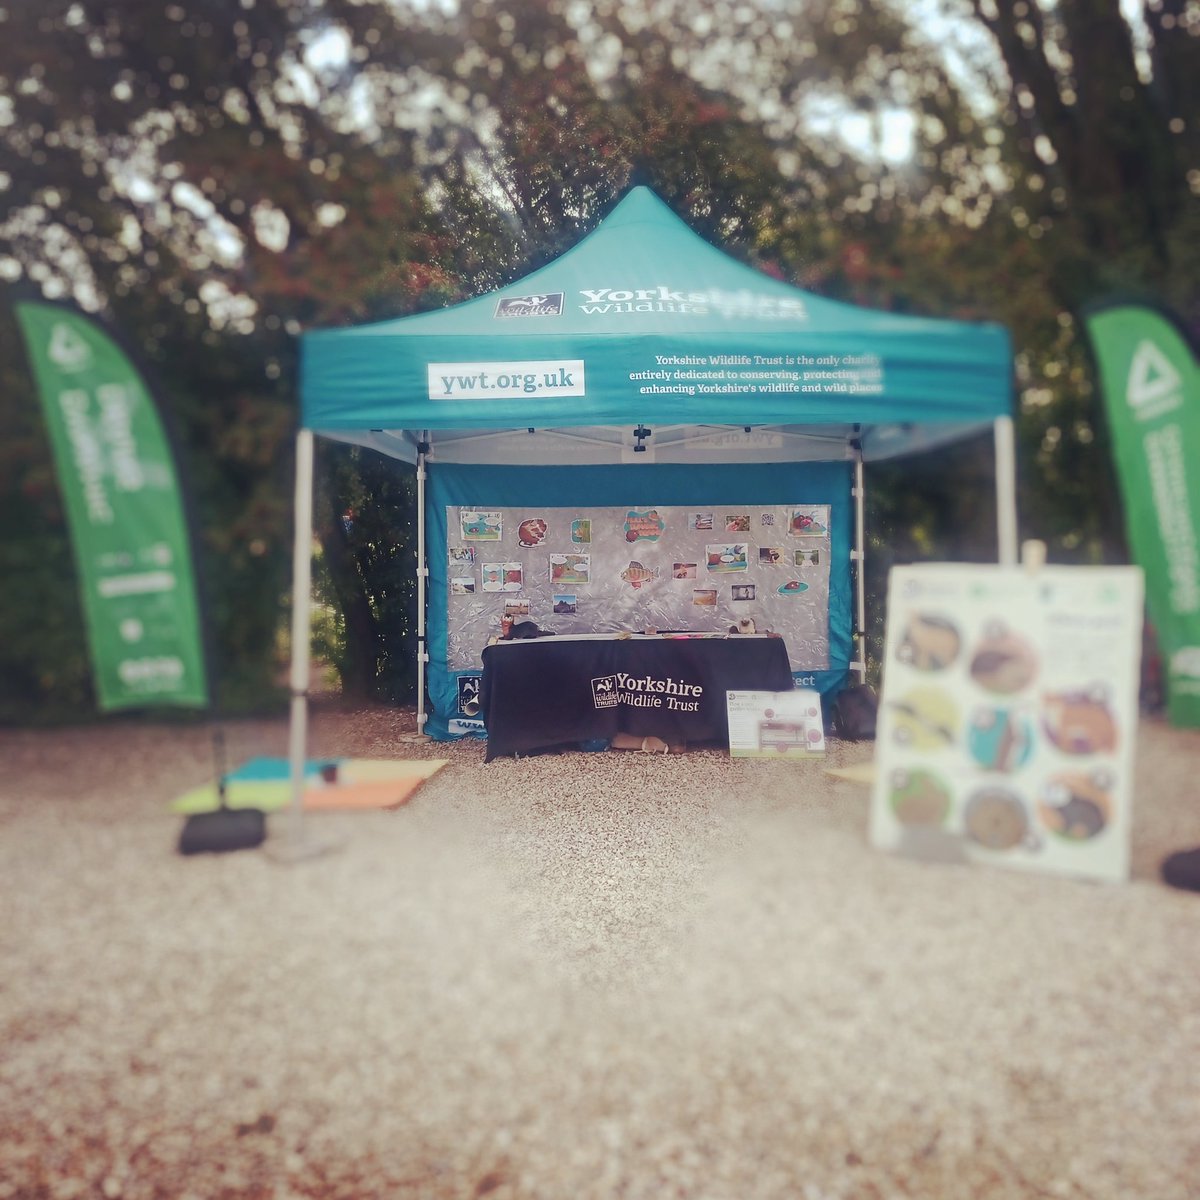 All set up on Cropton park with @EnvAgencyYNE @YorksWildlife @LivingWithH2O @Hullfloodrisk #Funday #consultation #DynamicDrains